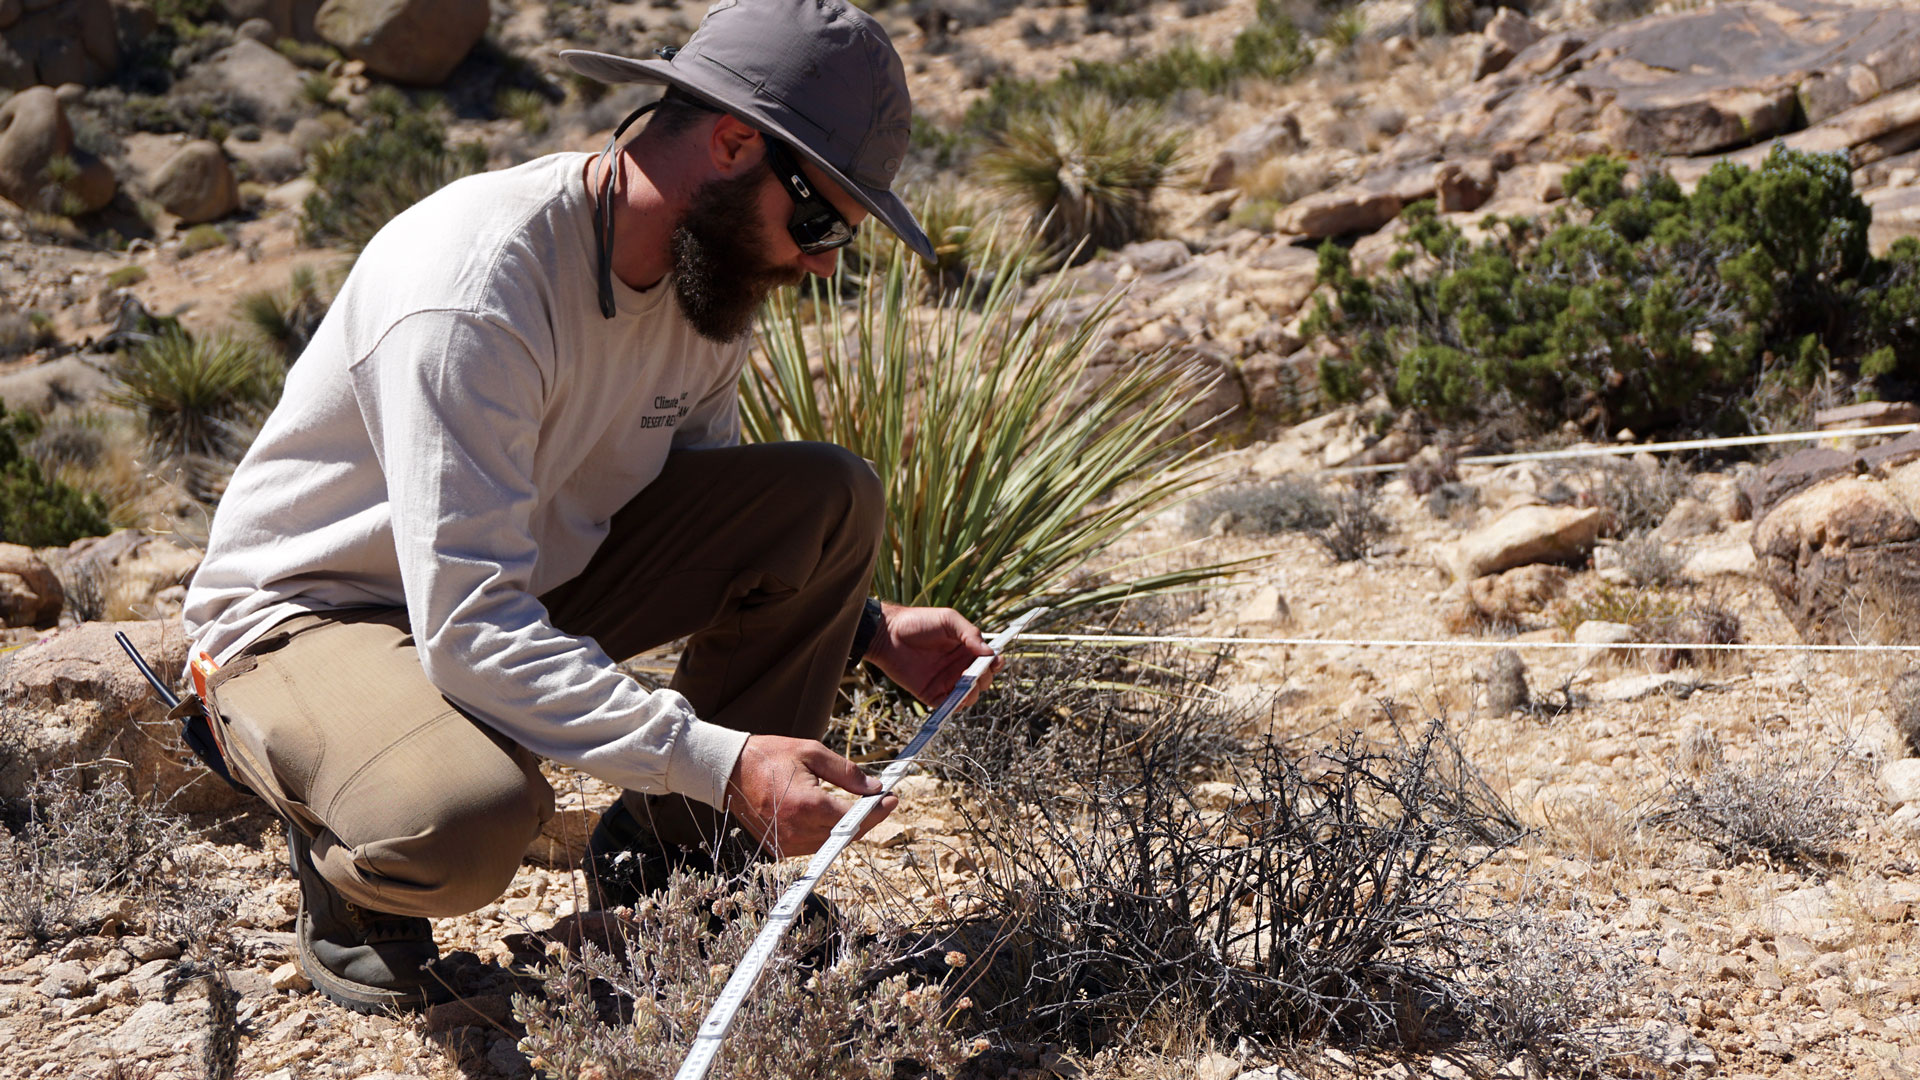 James Heintz of UC Riverside maps out plant life for a yearly ecosystem census.